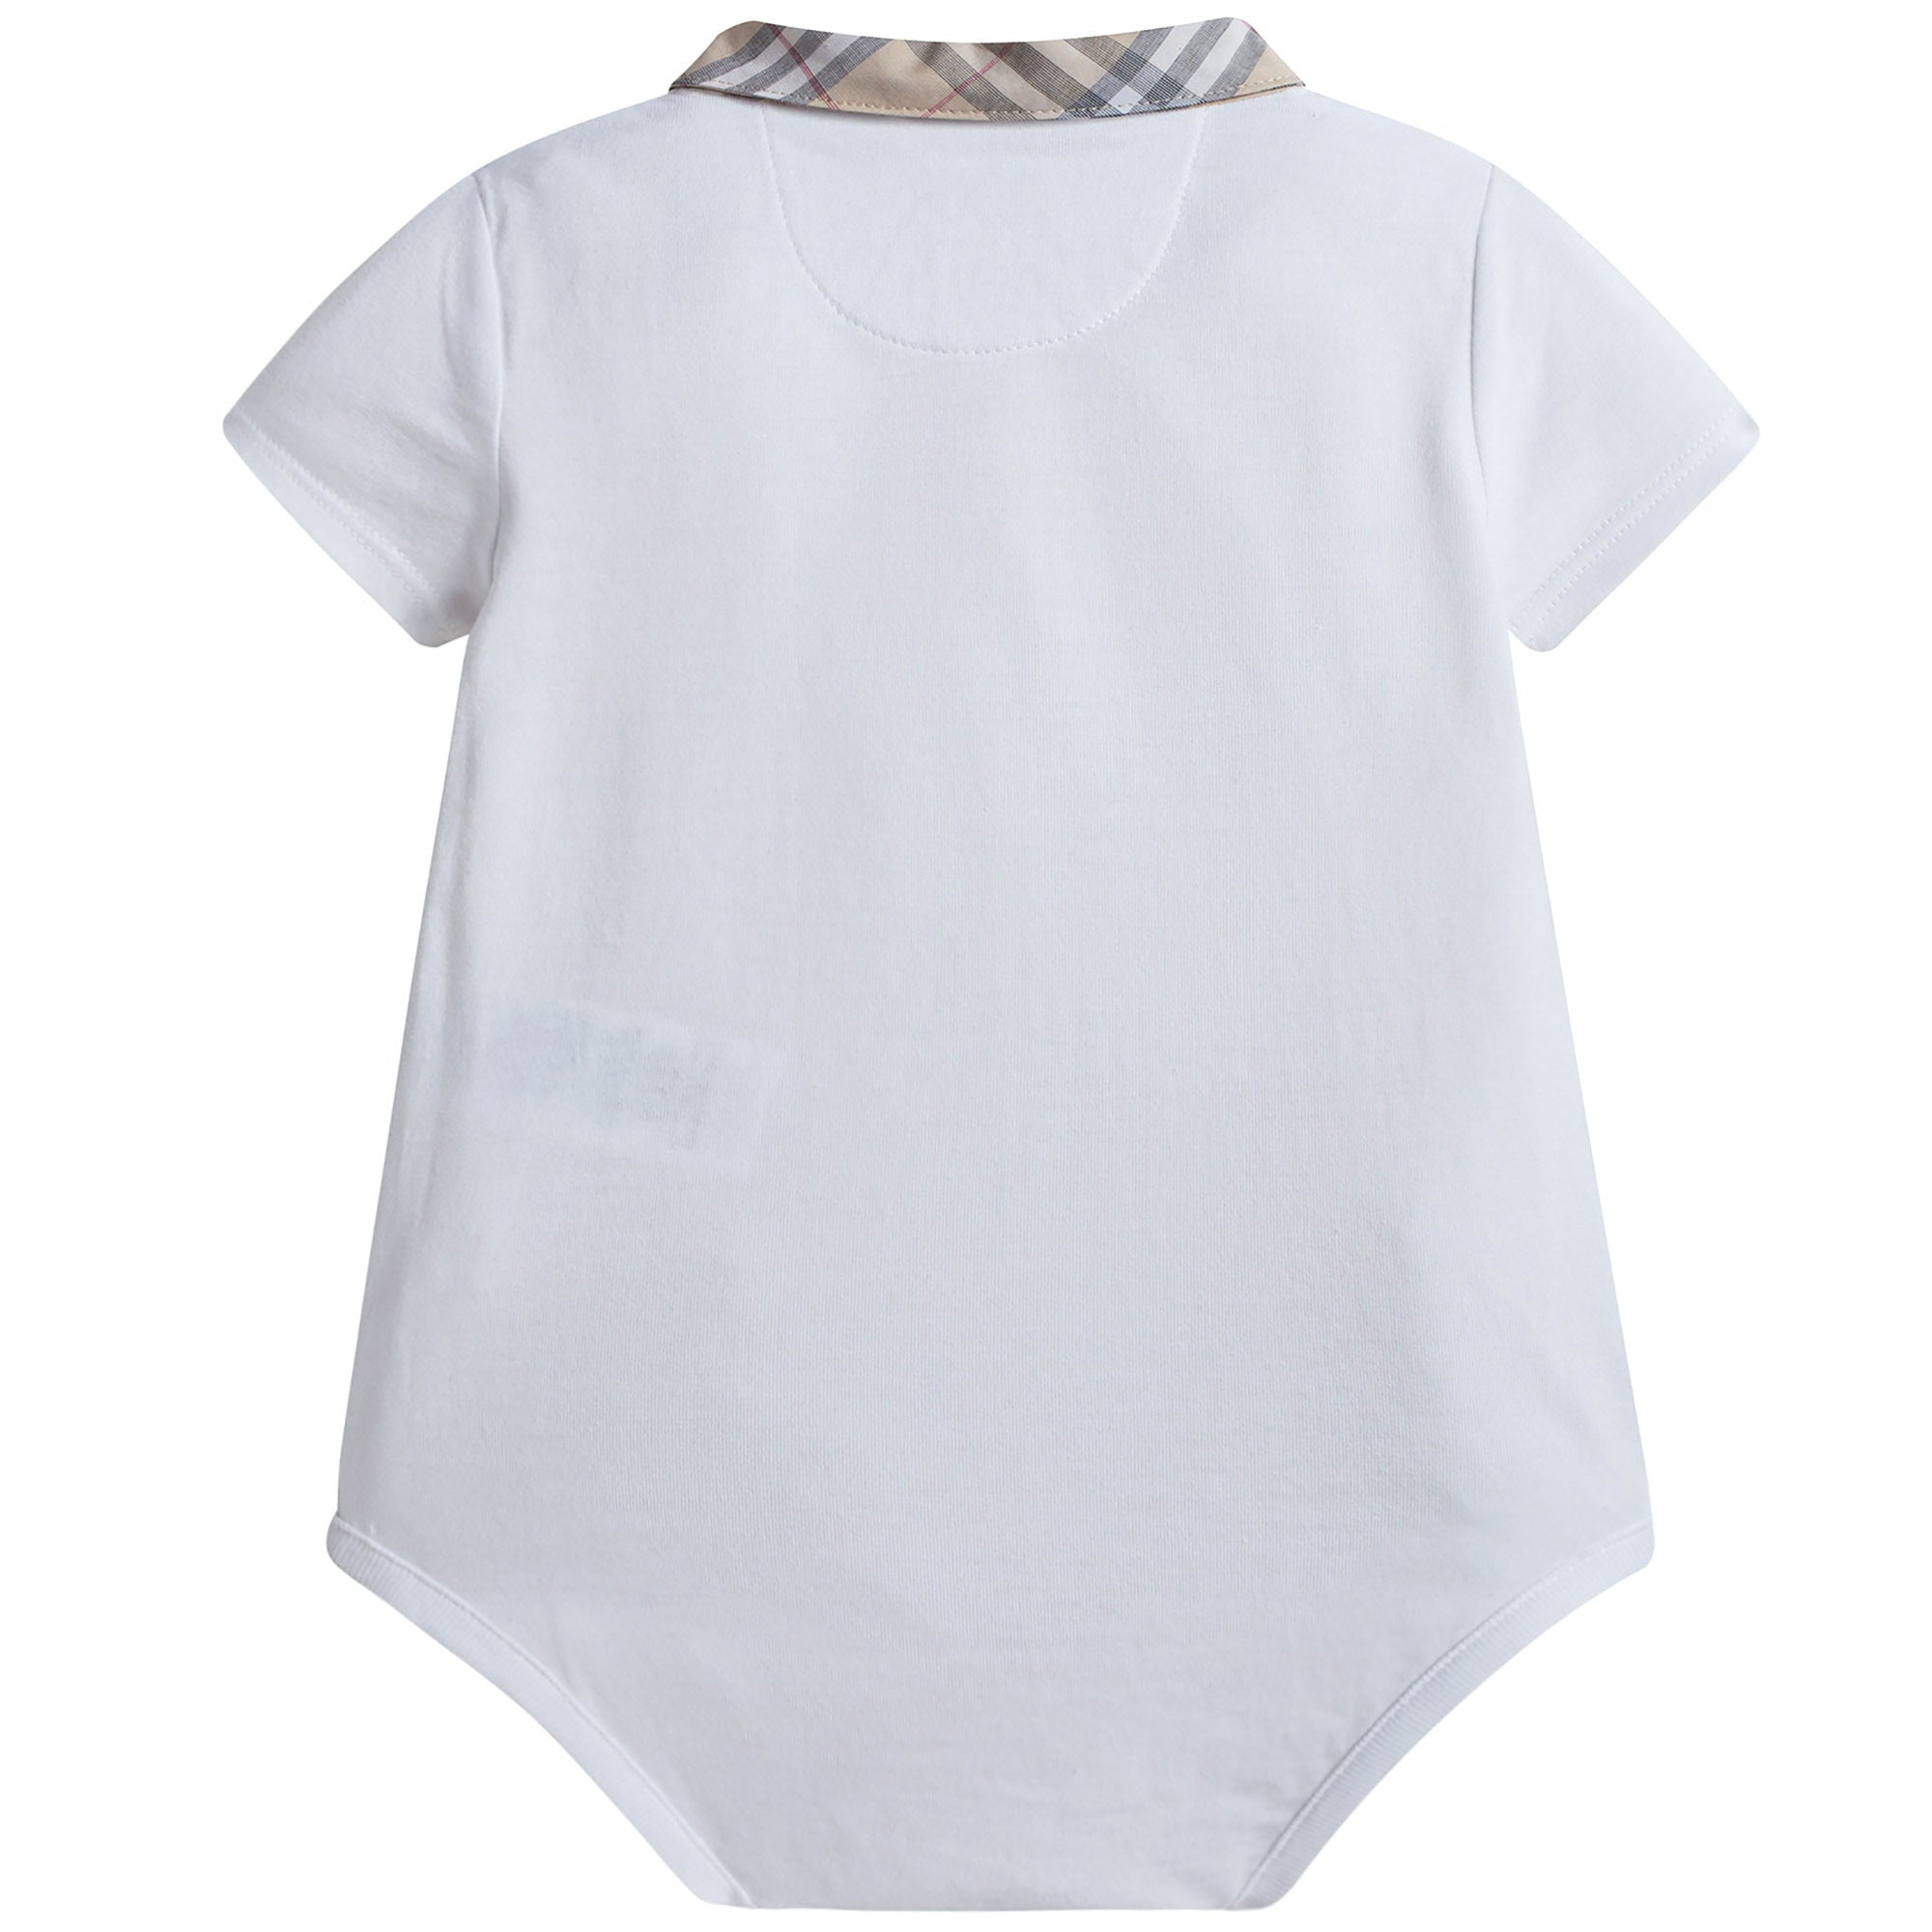 Baby White Bodysuits With Beige Check Collar